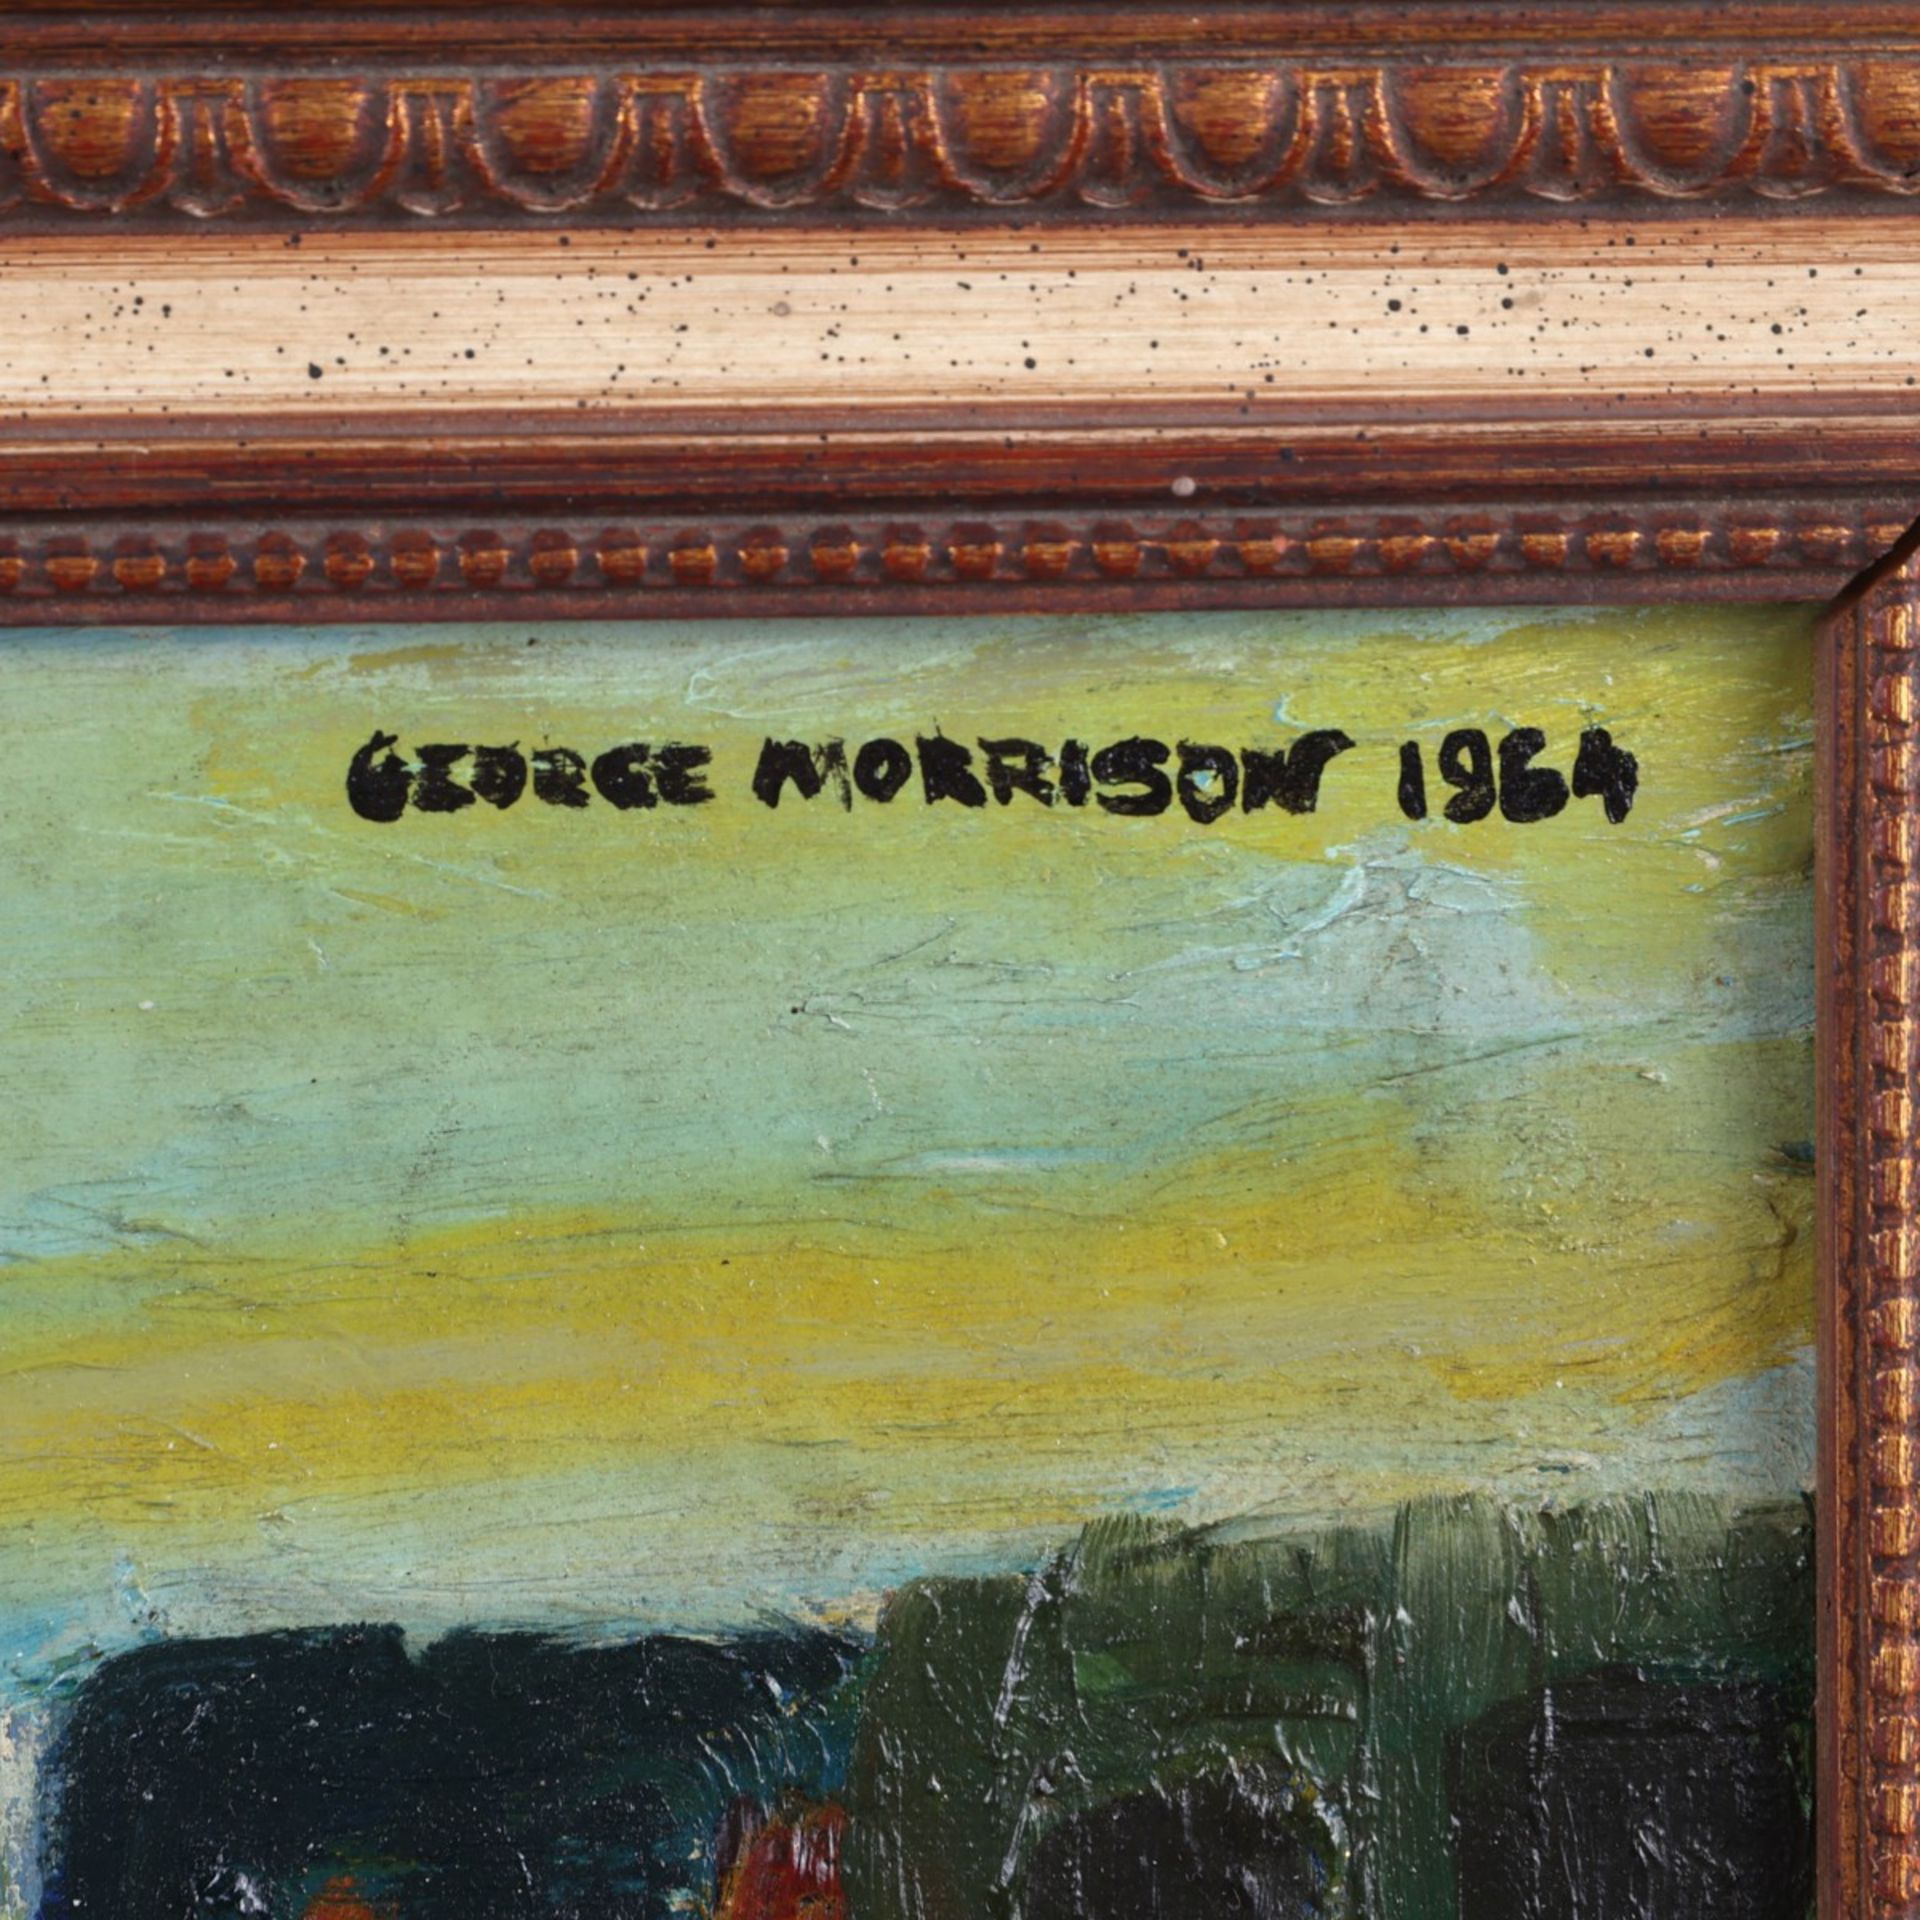 George Morrison Abstract Painting 1964 - Image 4 of 5